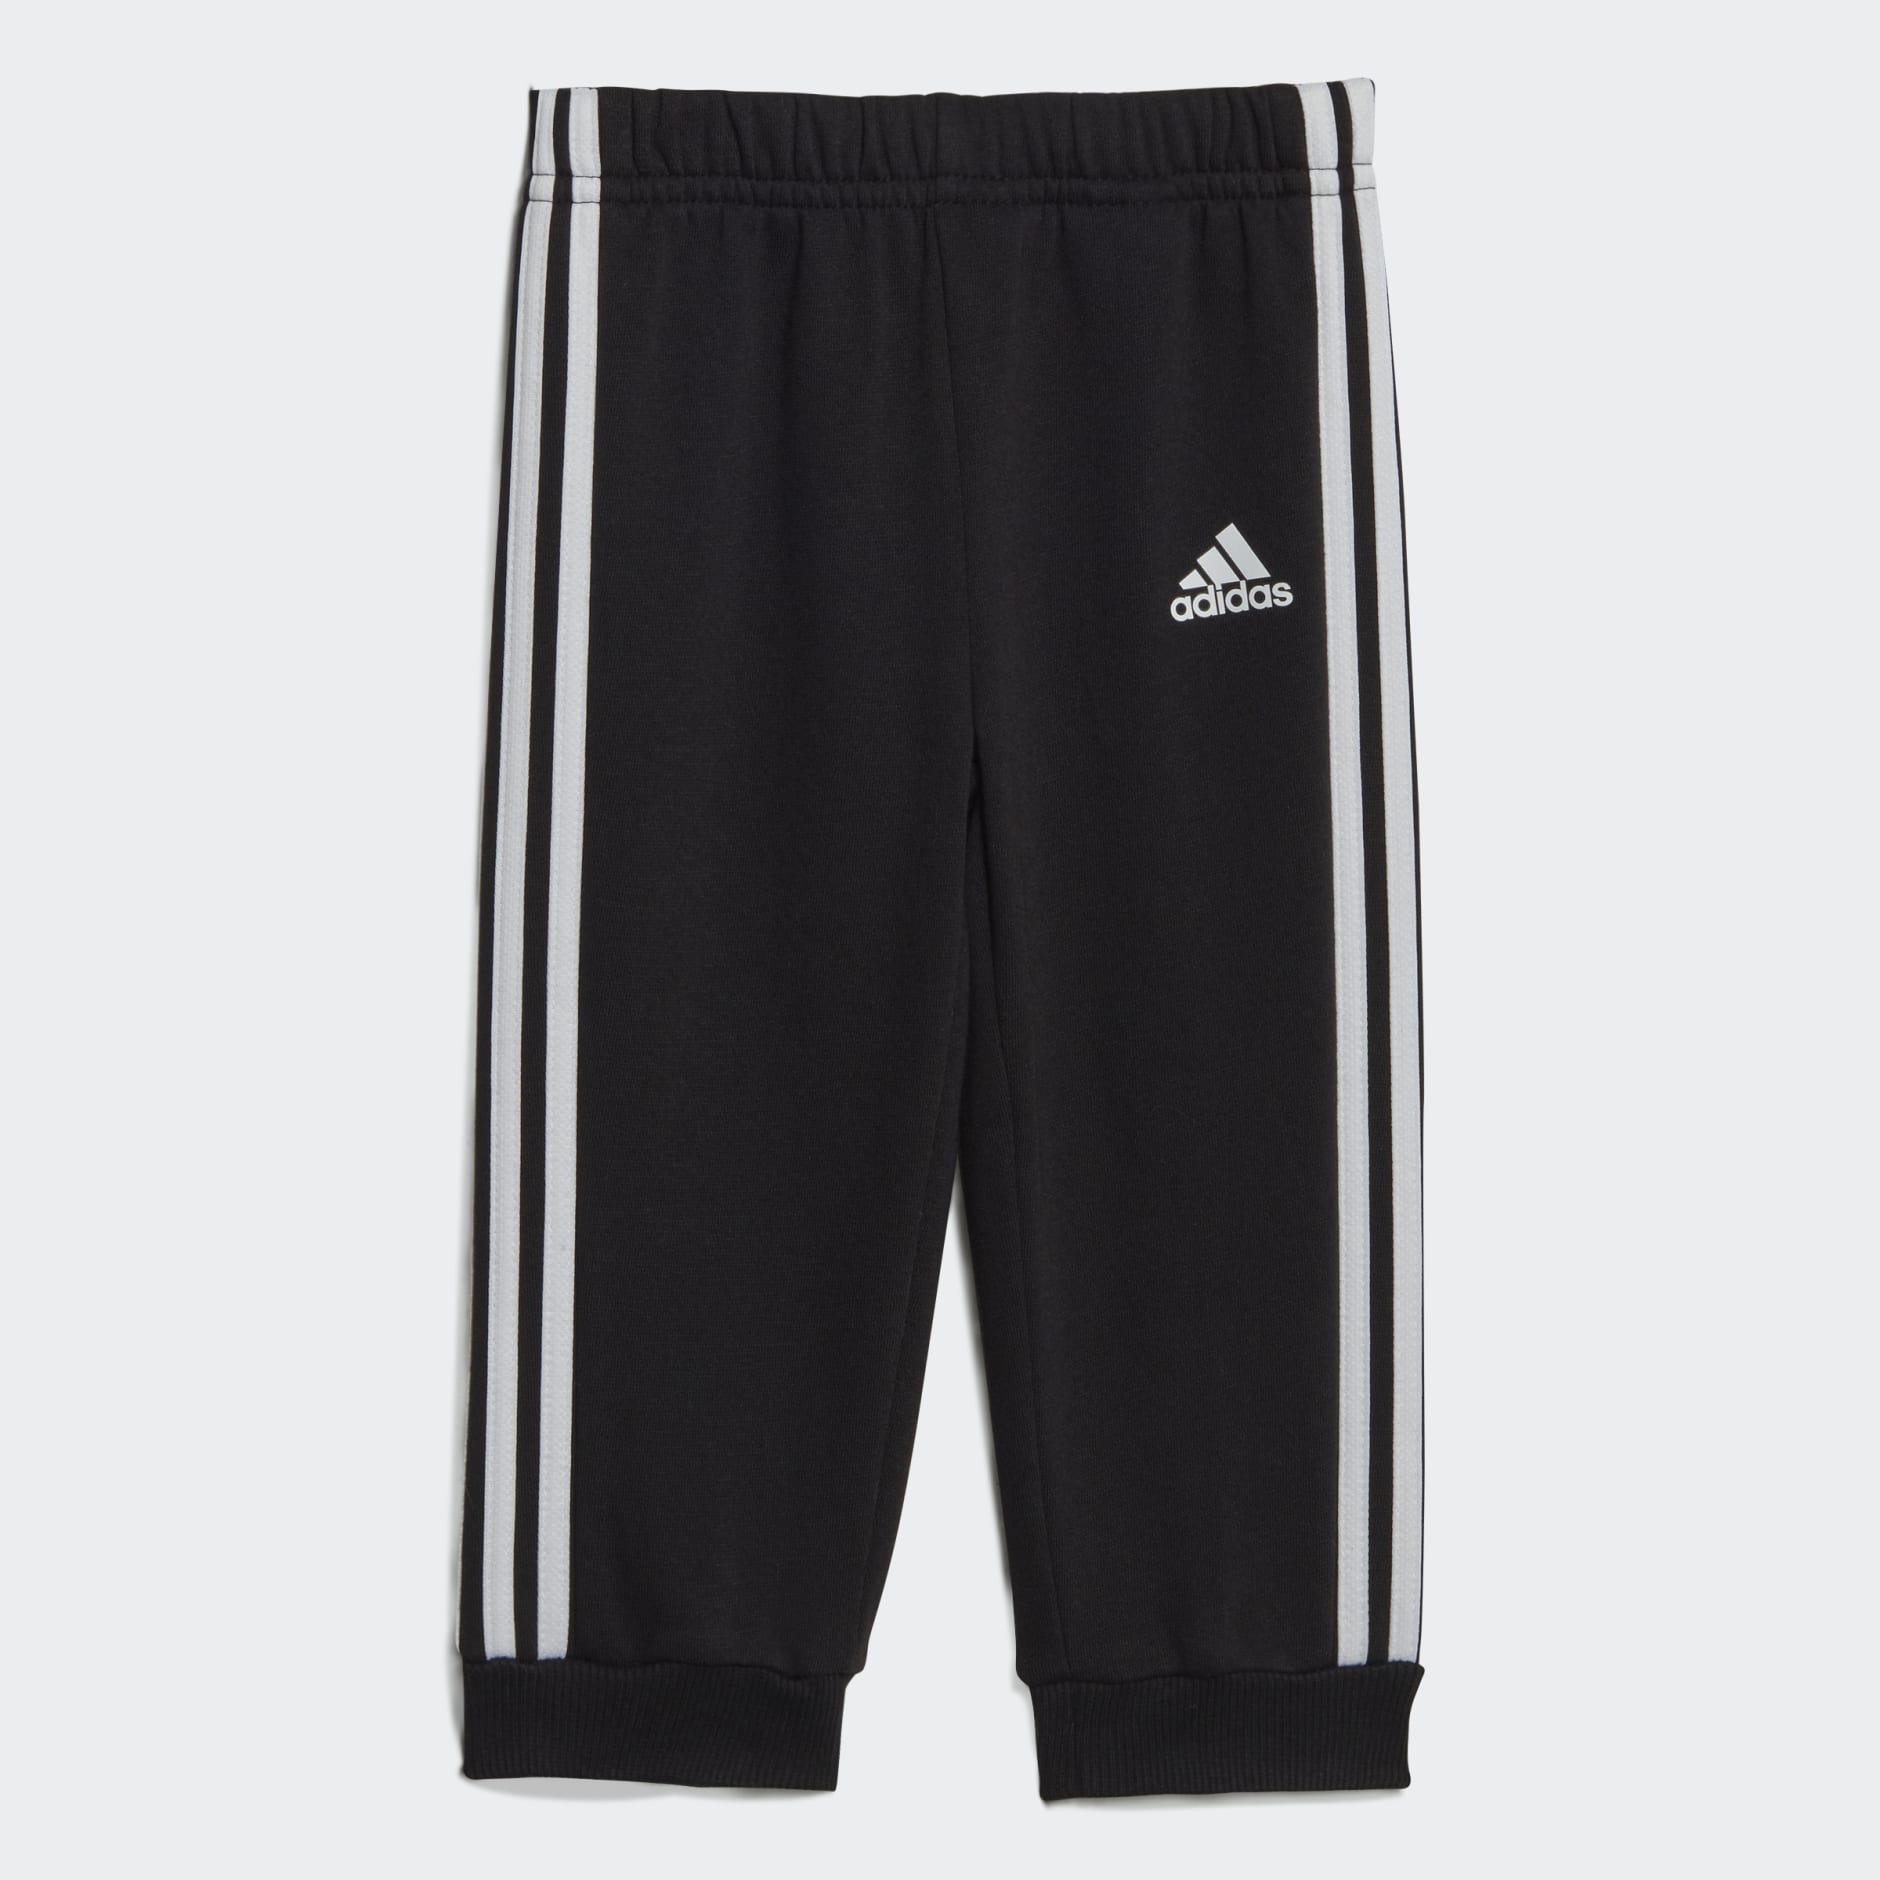 Clothing - Essentials Full-Zip Hooded Jogger Set - Black | adidas South ...